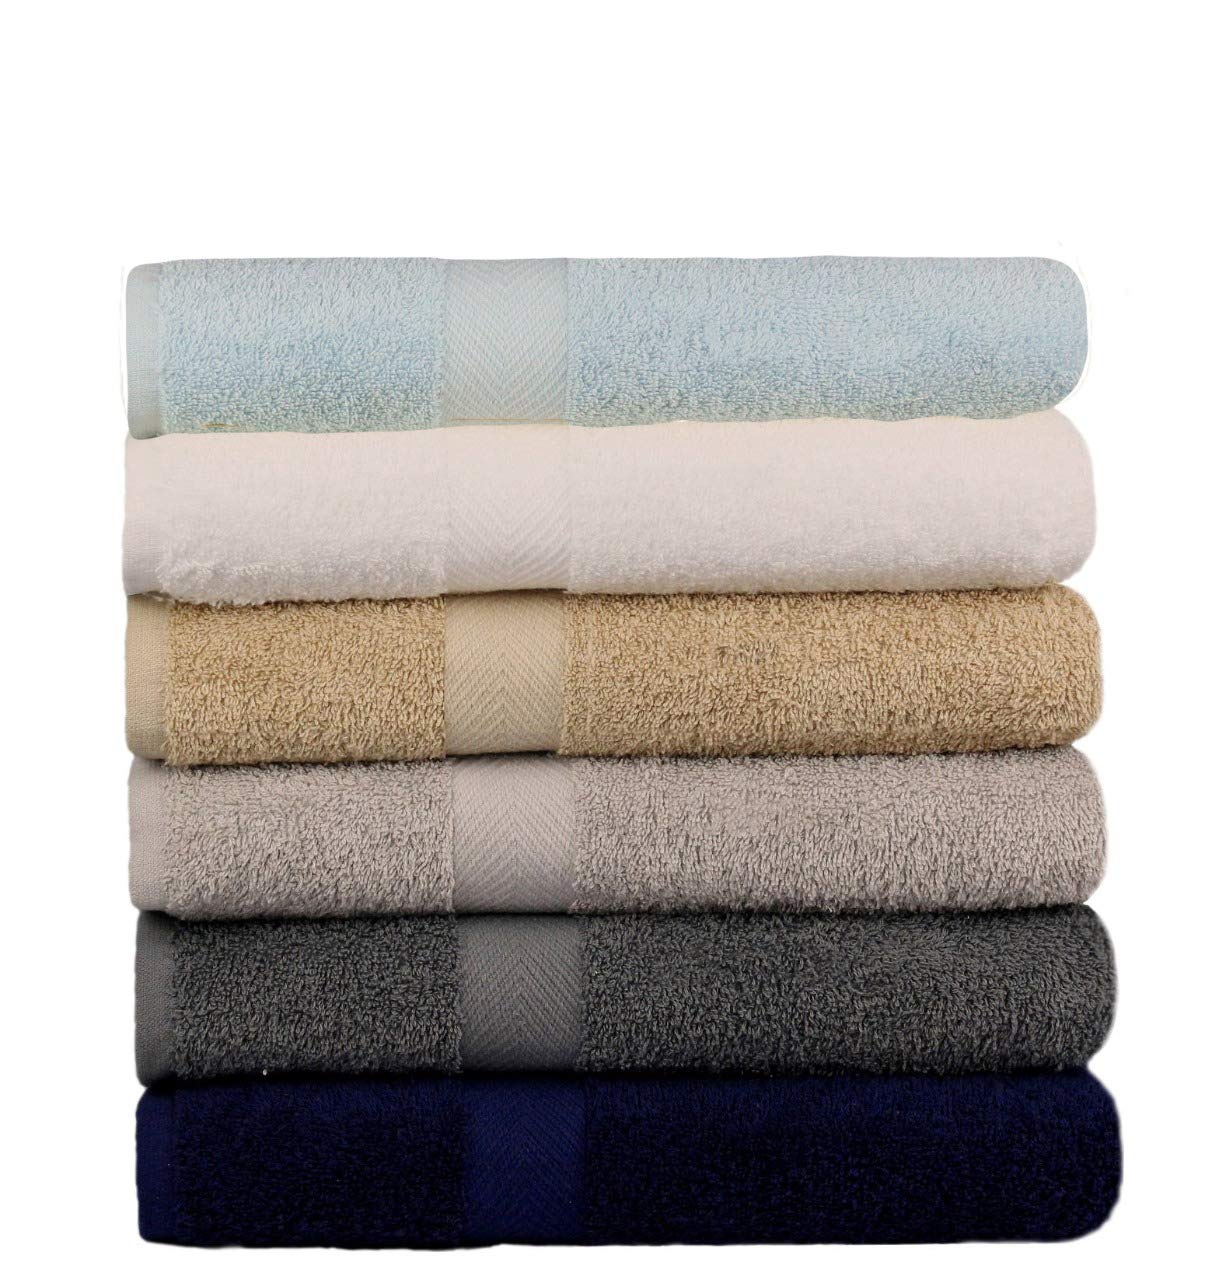 Best Towel KAHAF Collection 6-Pack Bath Towels - Lightweight - Extra Absorbent - 100% Cotton - Shower Towels (Multi, 27 inchesx54 inches)